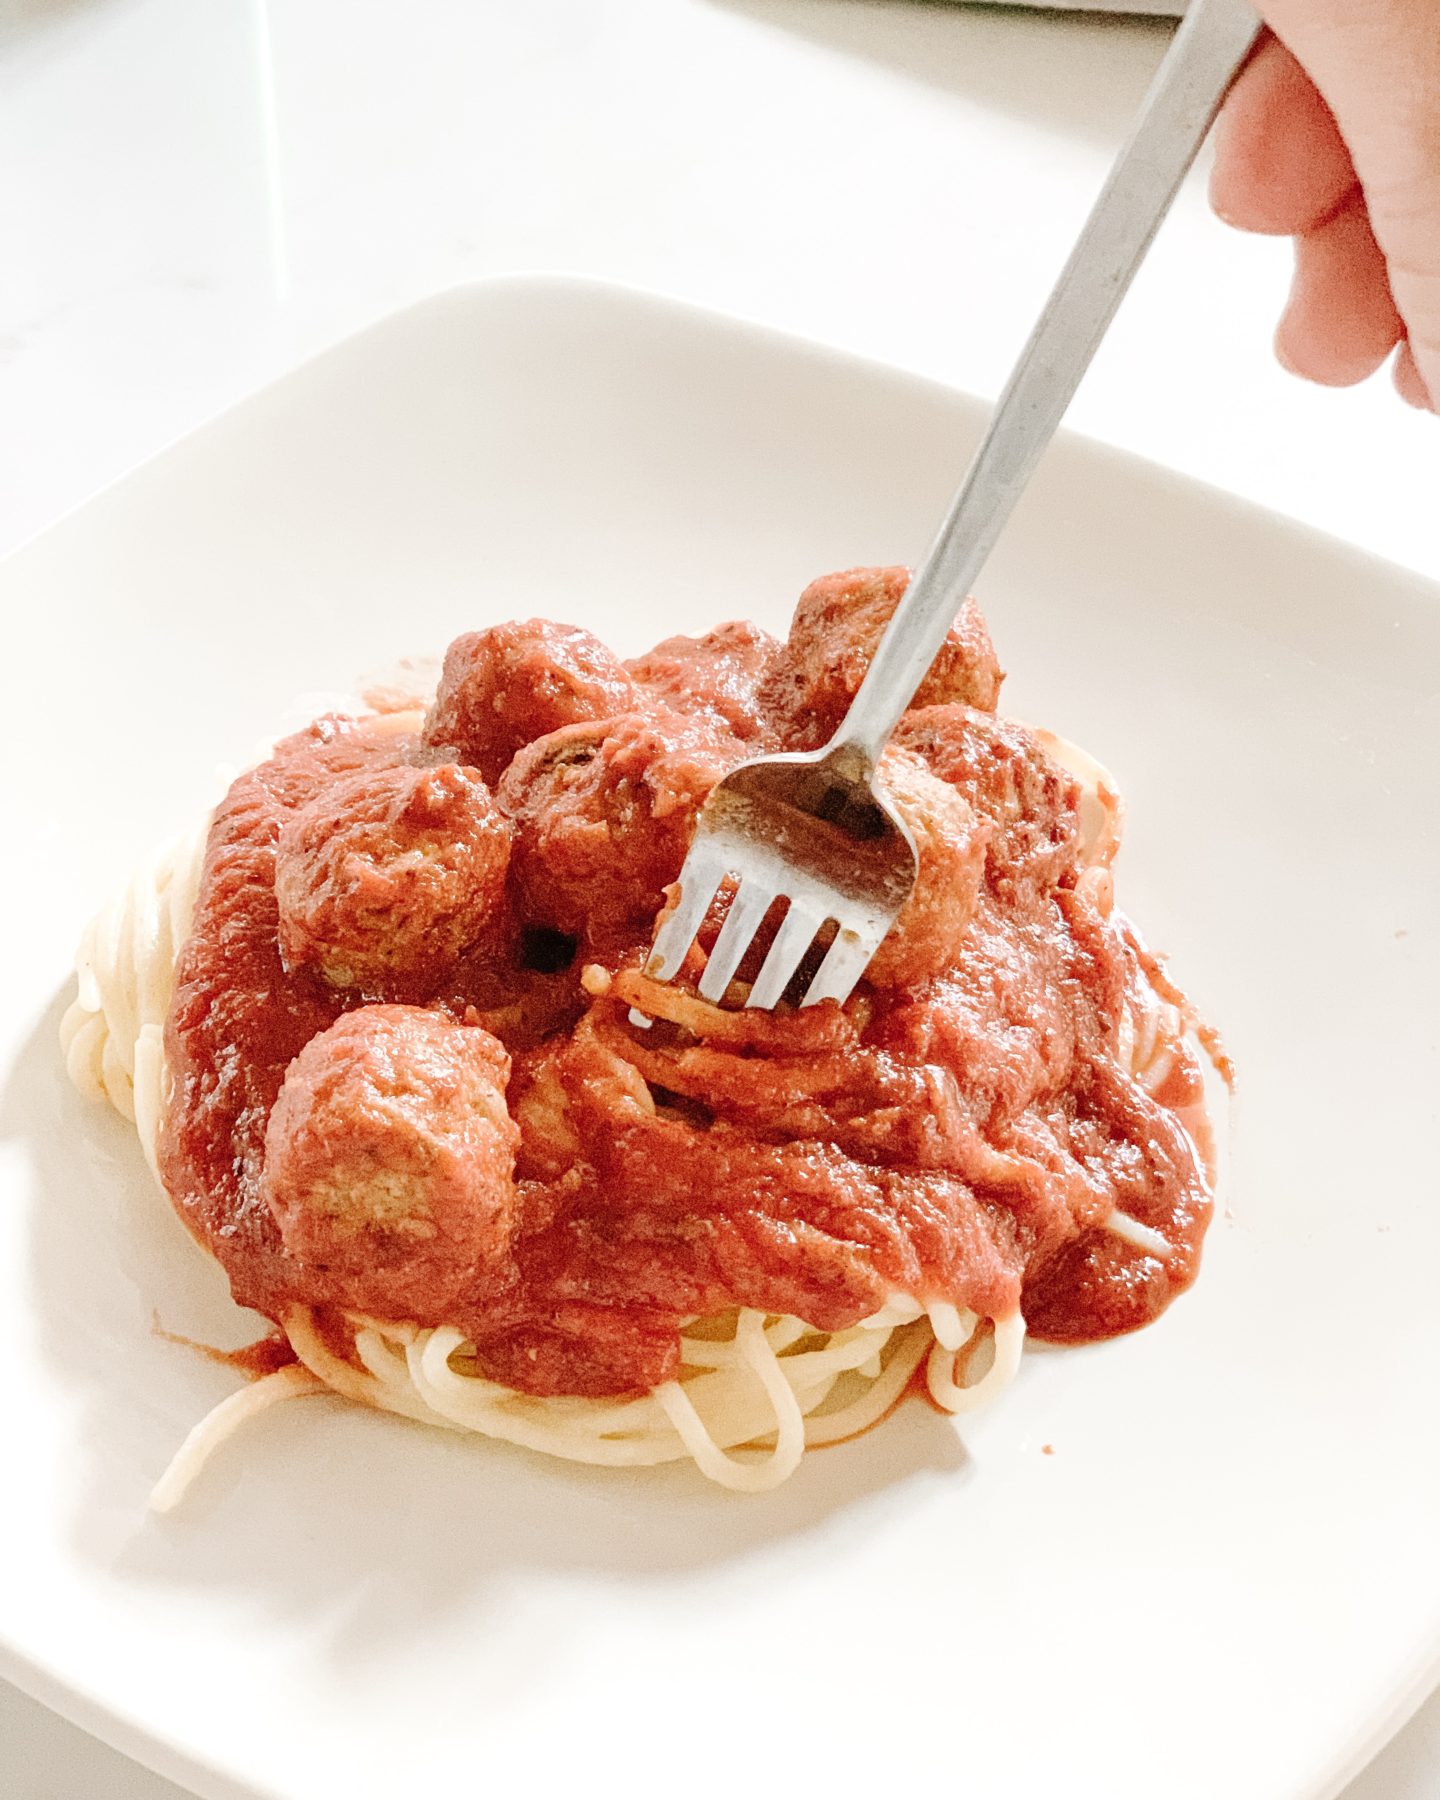 The best homemade spaghetti sauce you'll ever make.